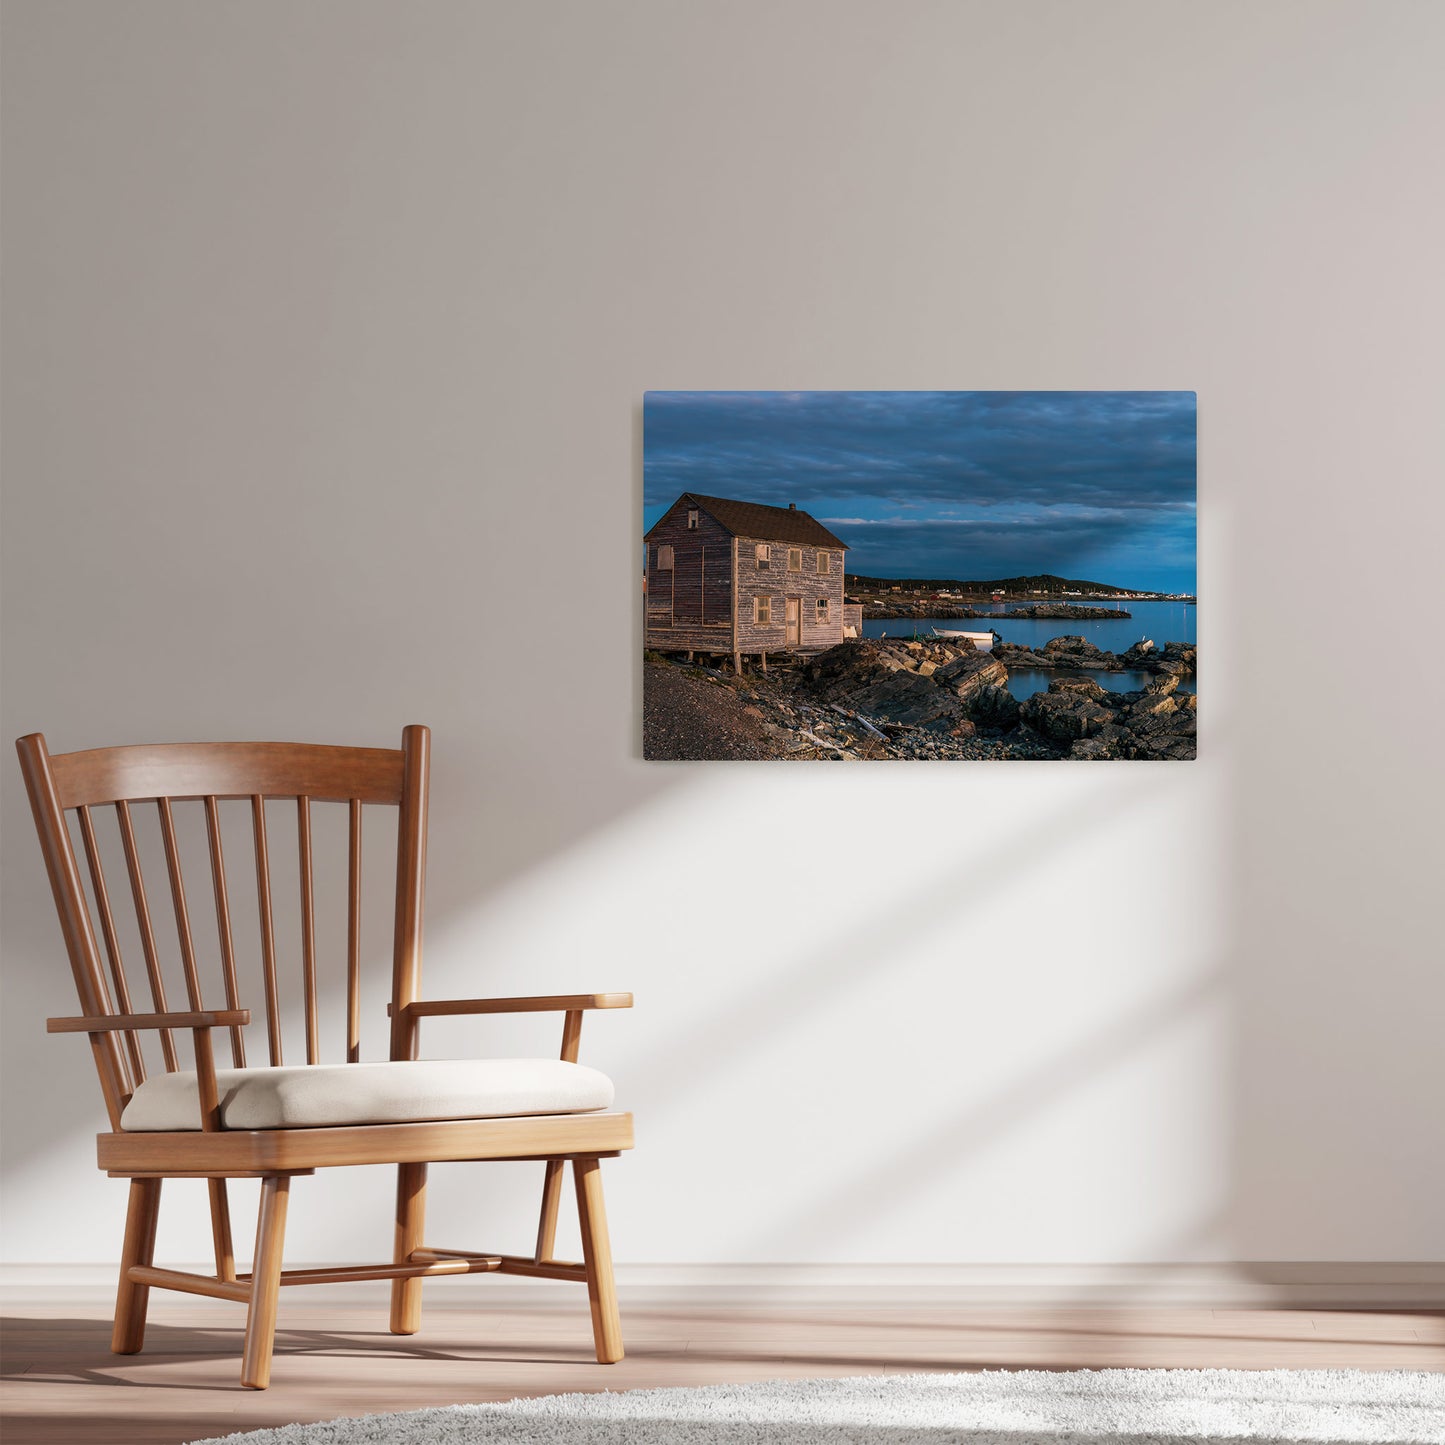 Ray Mackey's Island Harbour Blue photography reproduced on HD metal print and displayed on wall